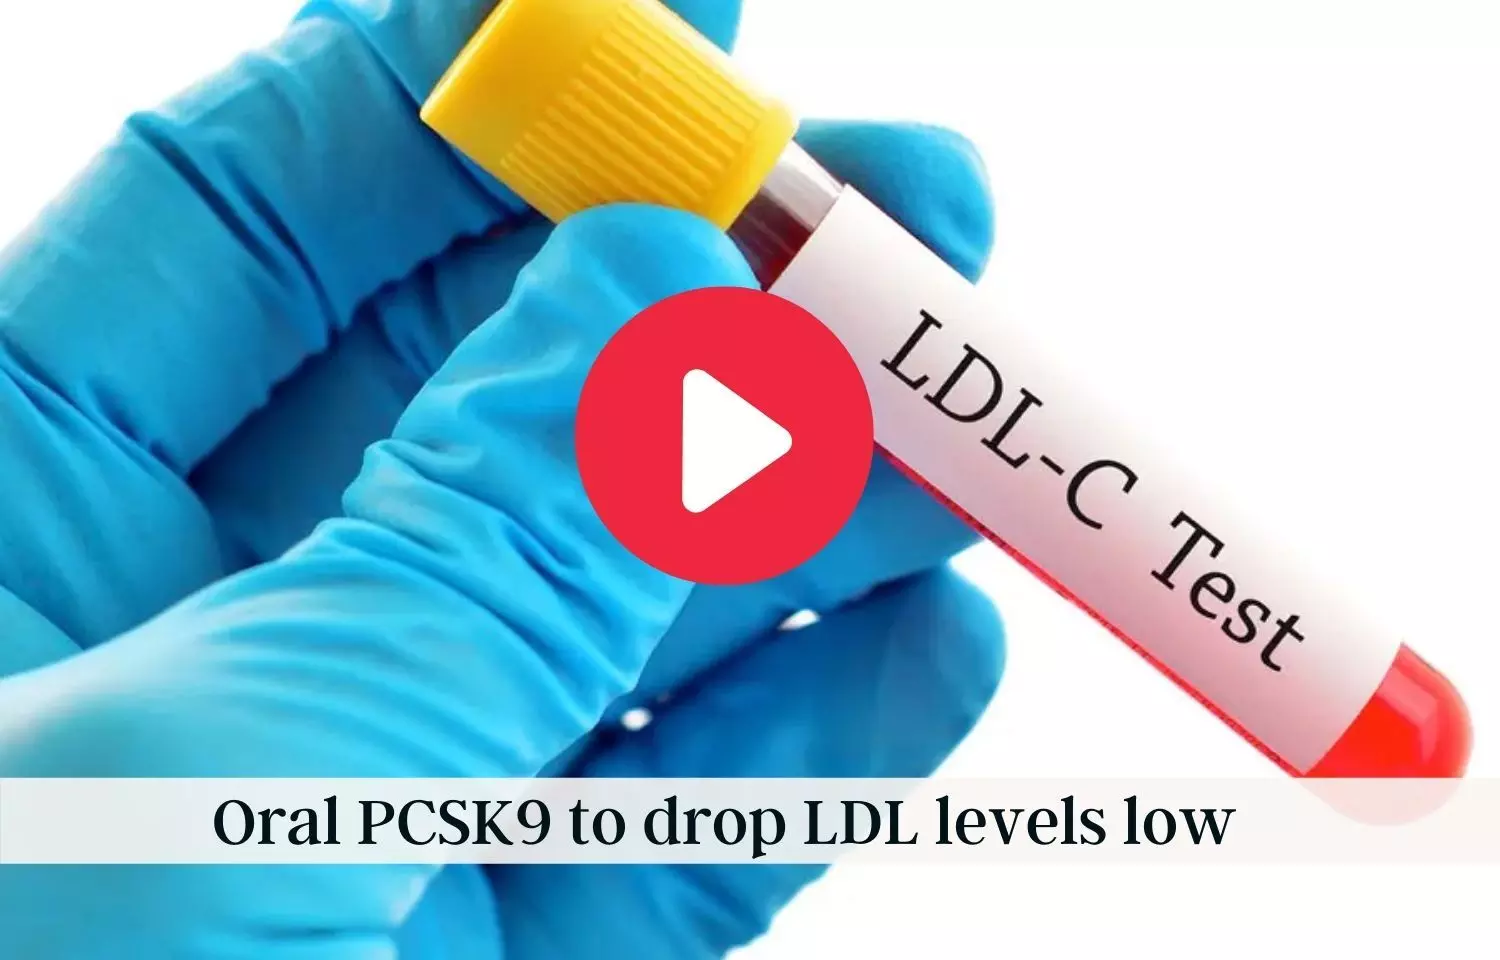 Oral PCSK9 to drop LDL levels low